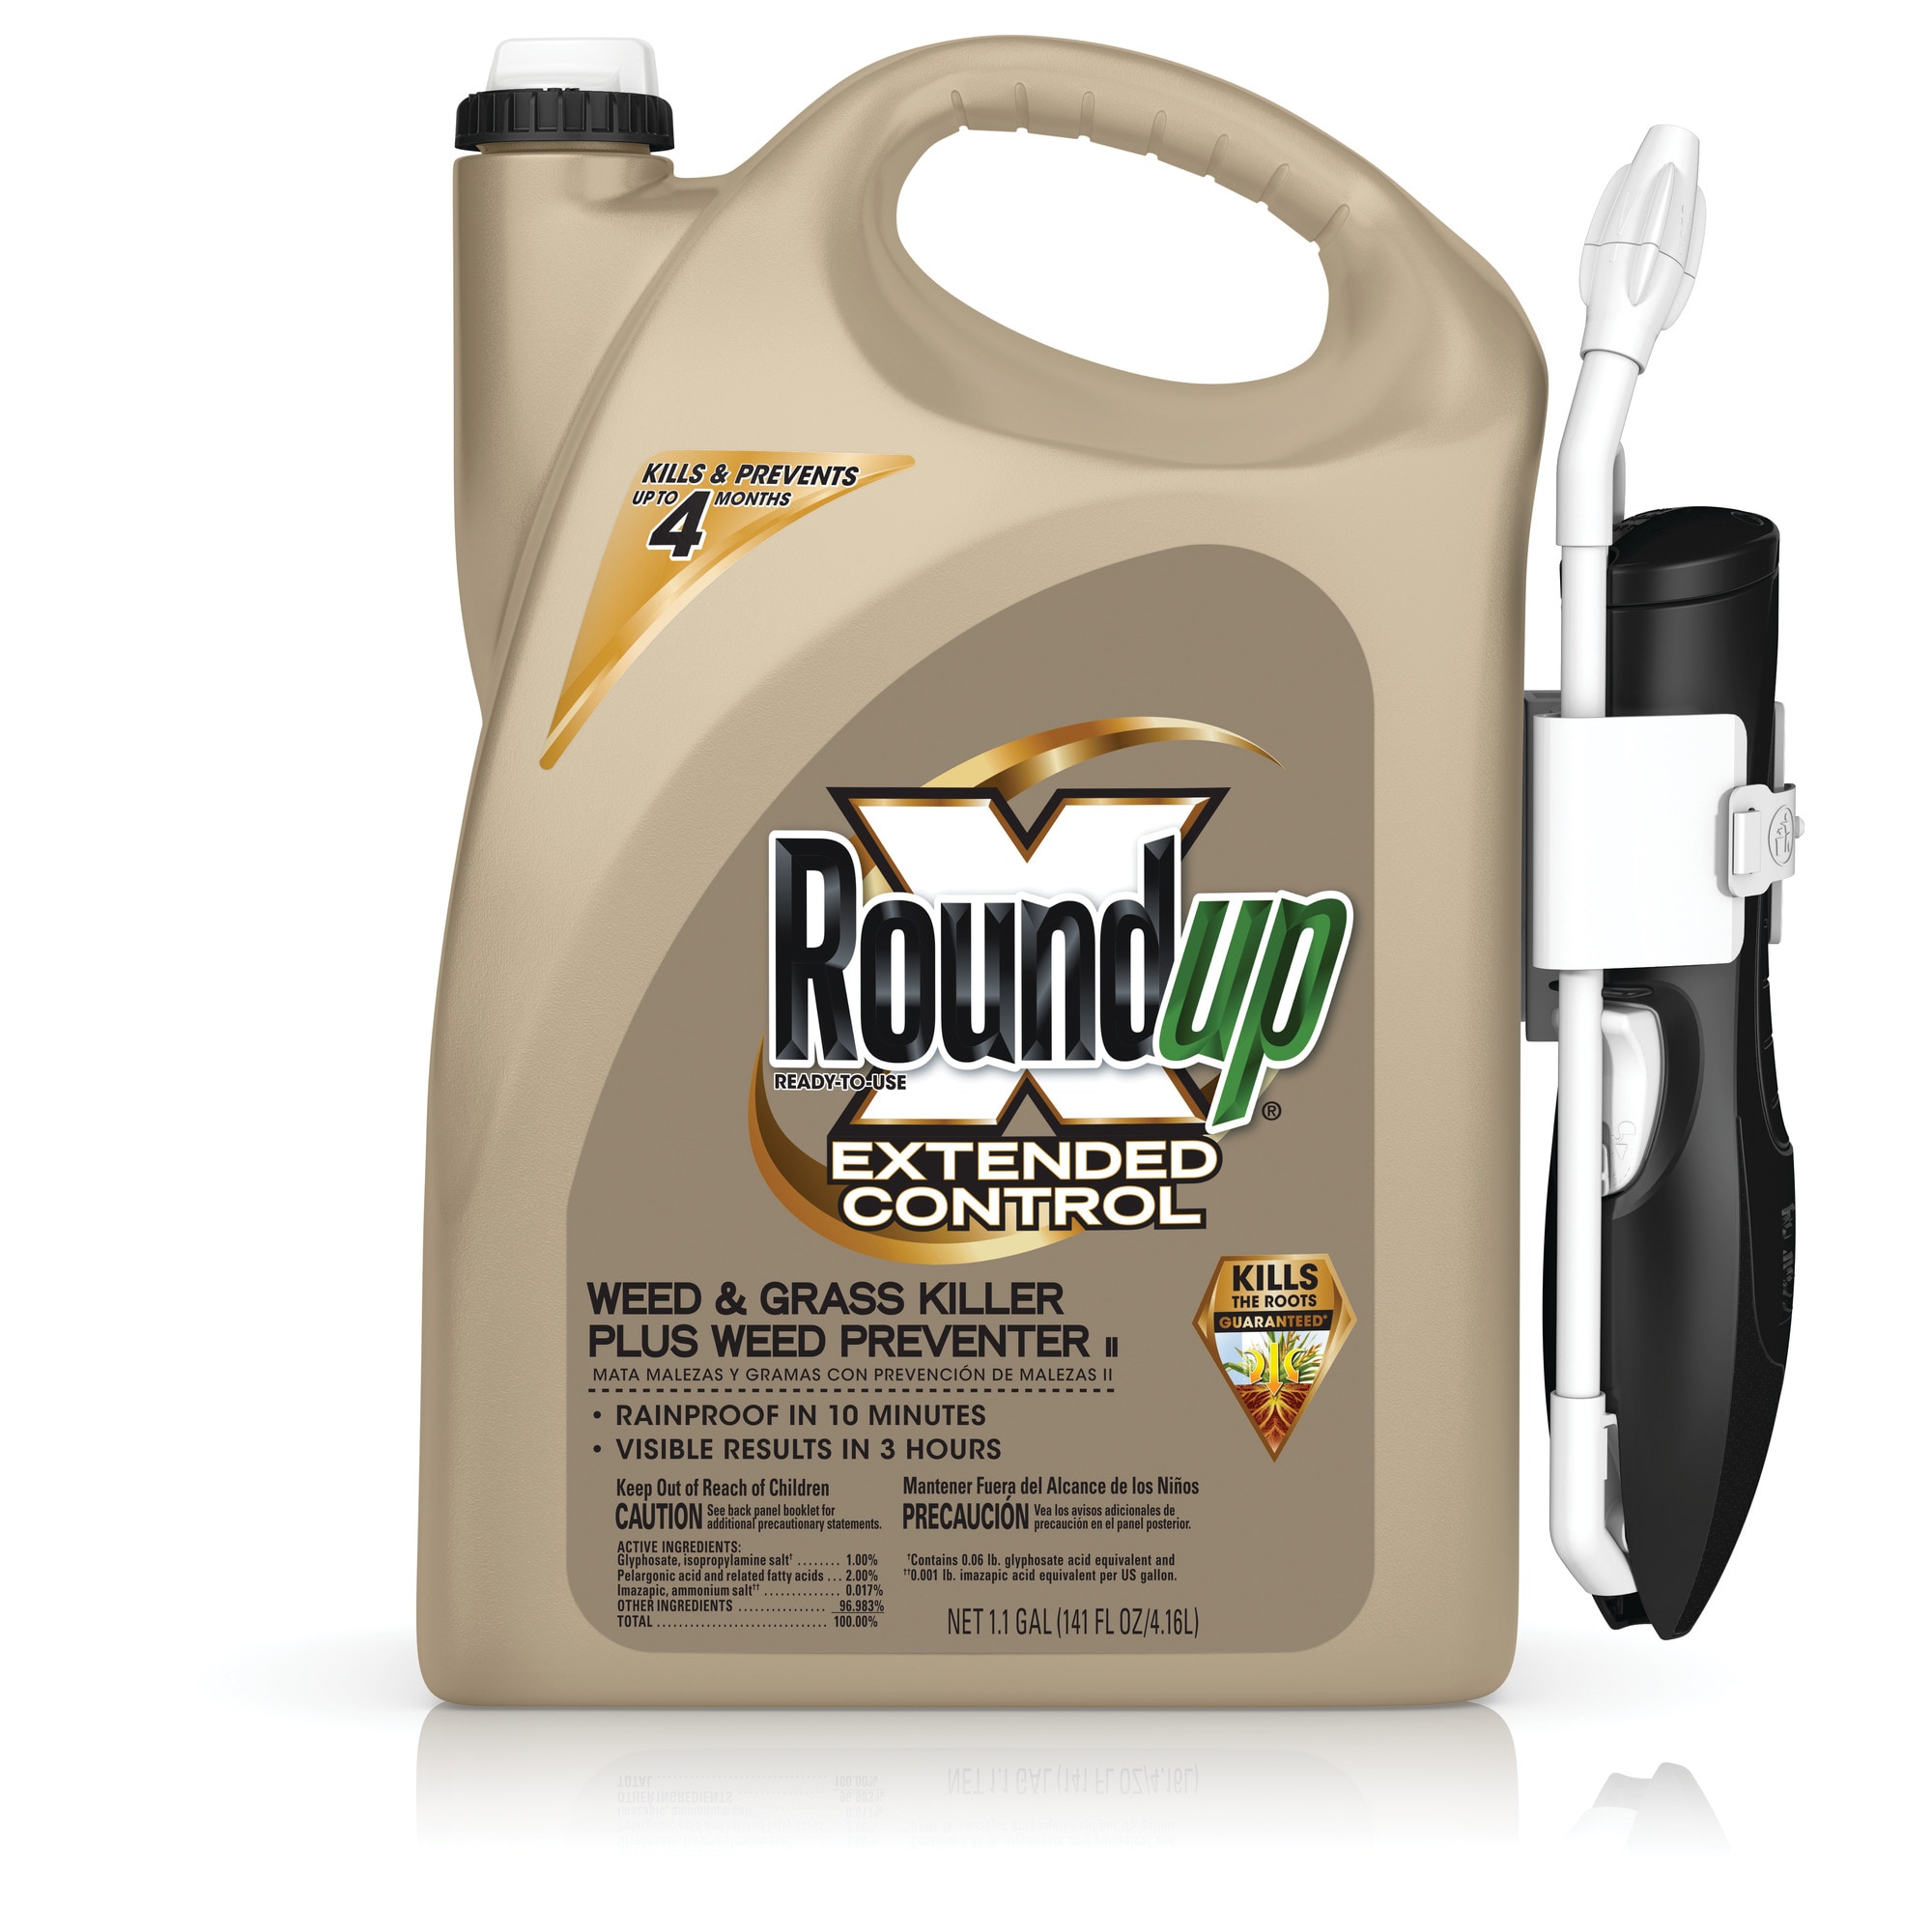 Roundup VB02165 Assortment Bundle Ready to Use Weed and Grass Killer - 3